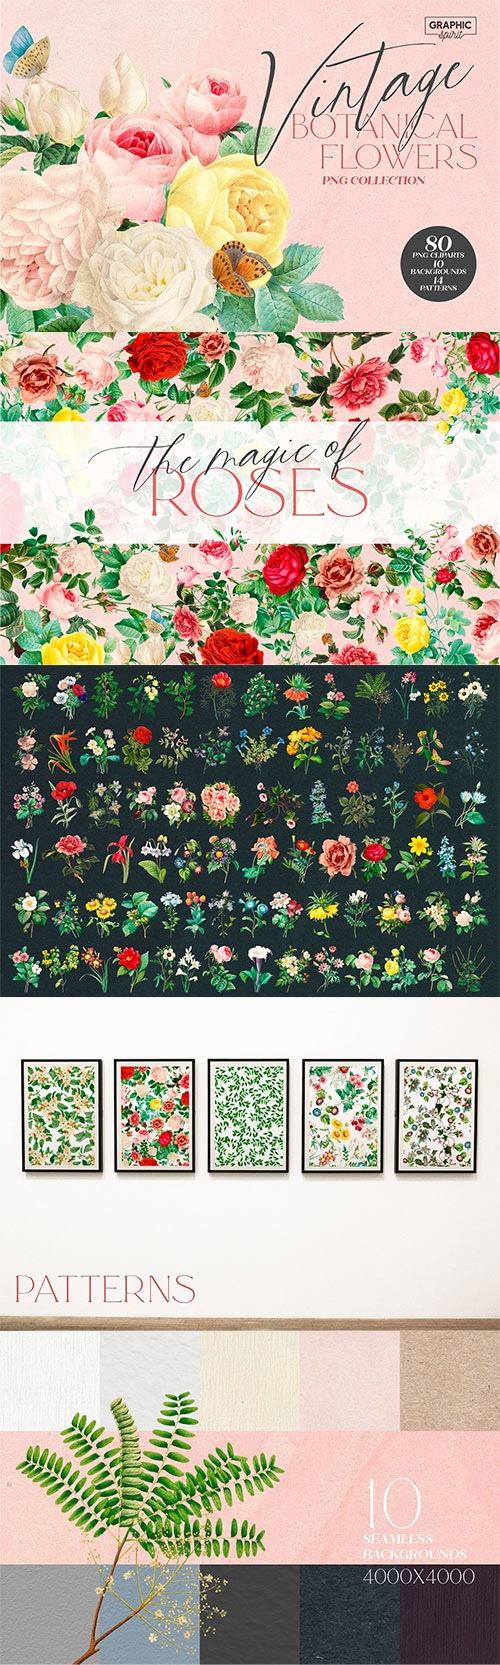 Aesthetic Vintage Flower PNG Clipart 6221182